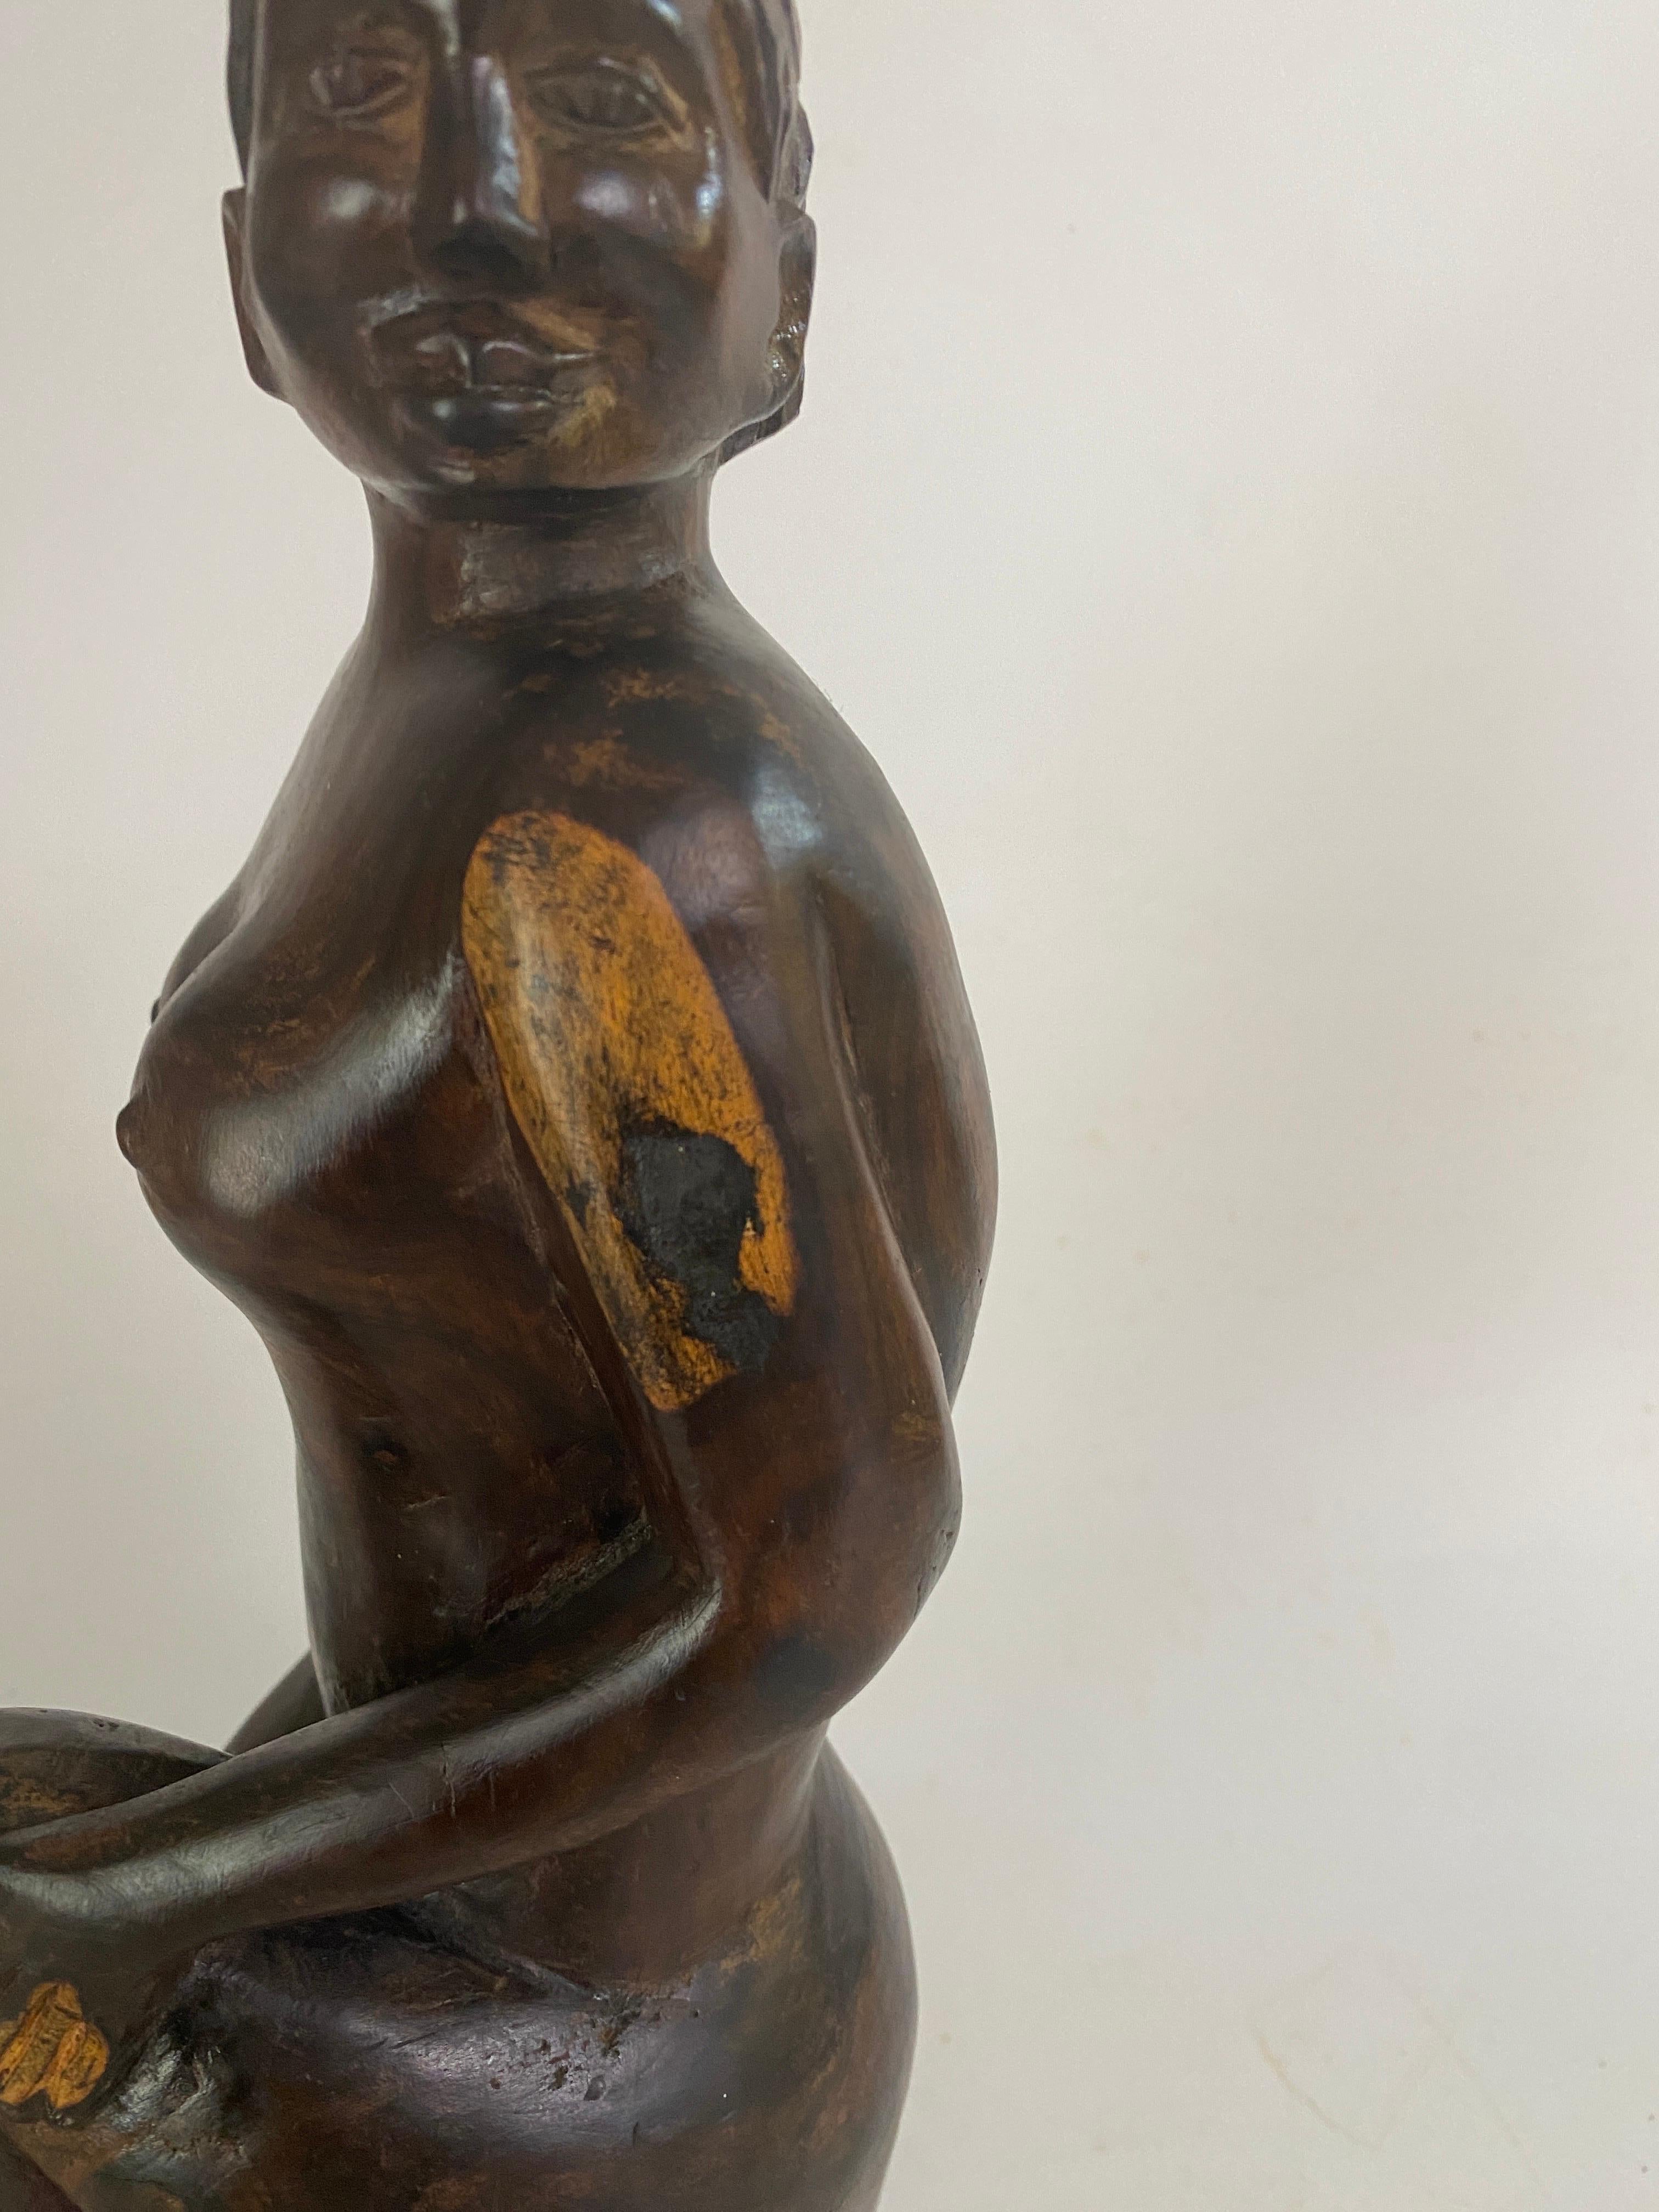 20th Century Sculpture in Wood from Africa  Woman Body, in a Brown Color 20TH Century